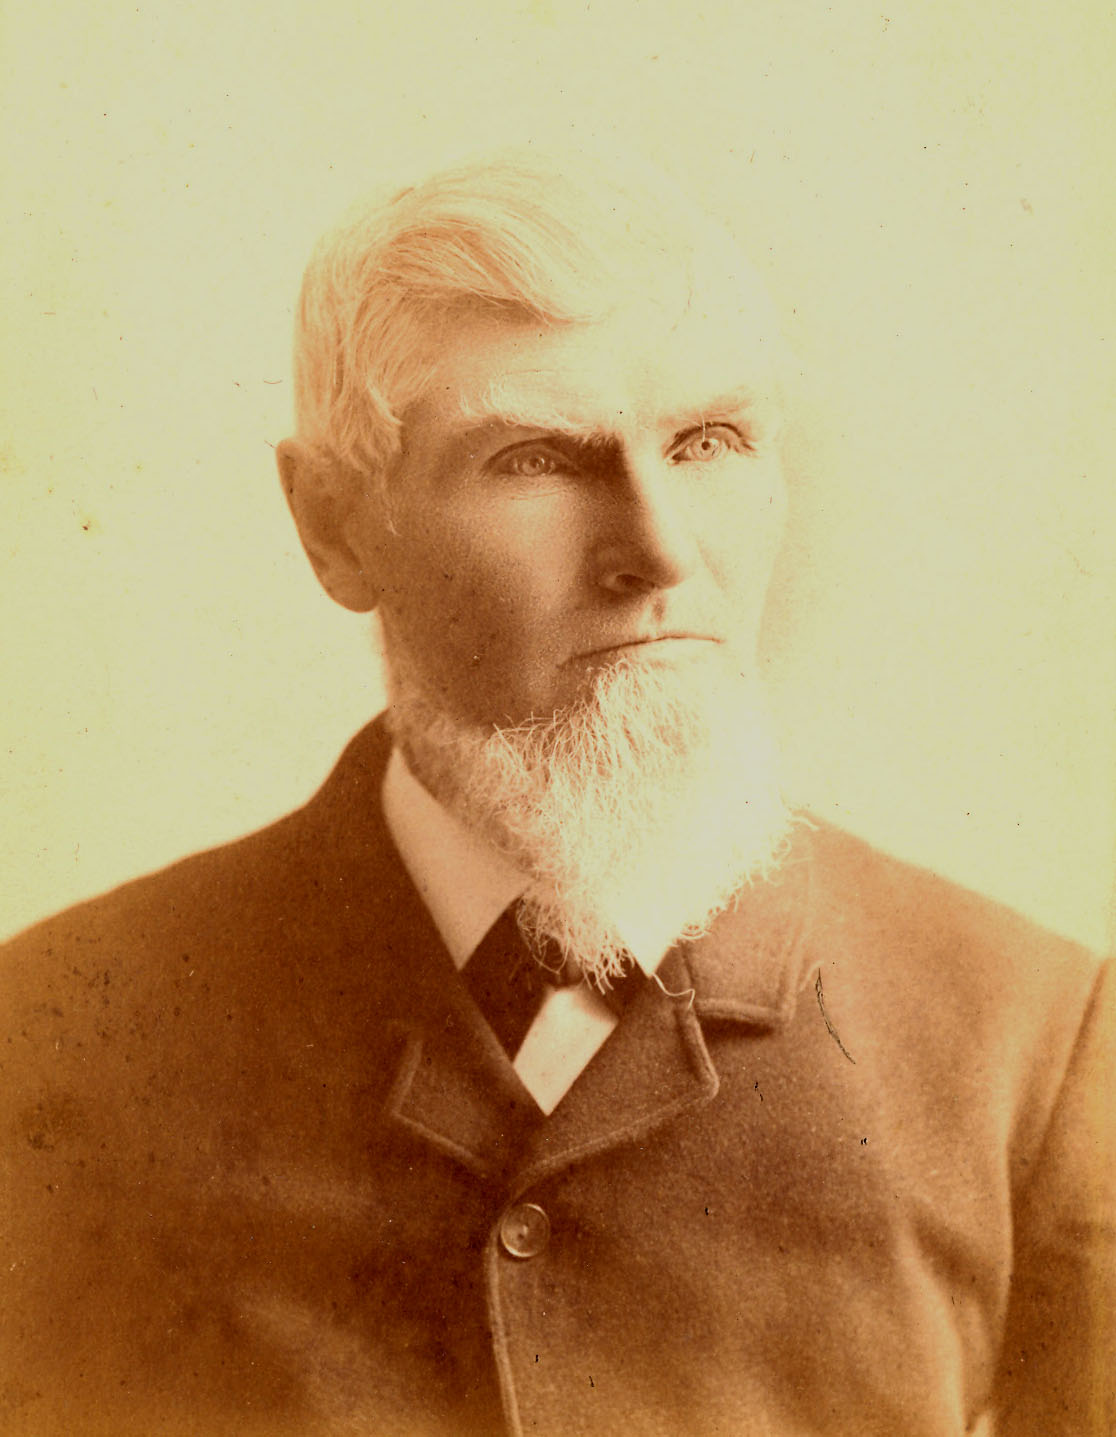 JOHN J. HAUSE was born on 18 Oct 1829. He married Catherine Eave Deissinger (b. 23 Aug 1830) around the year 1854. They had a son, William Hause, ... - johnjhause